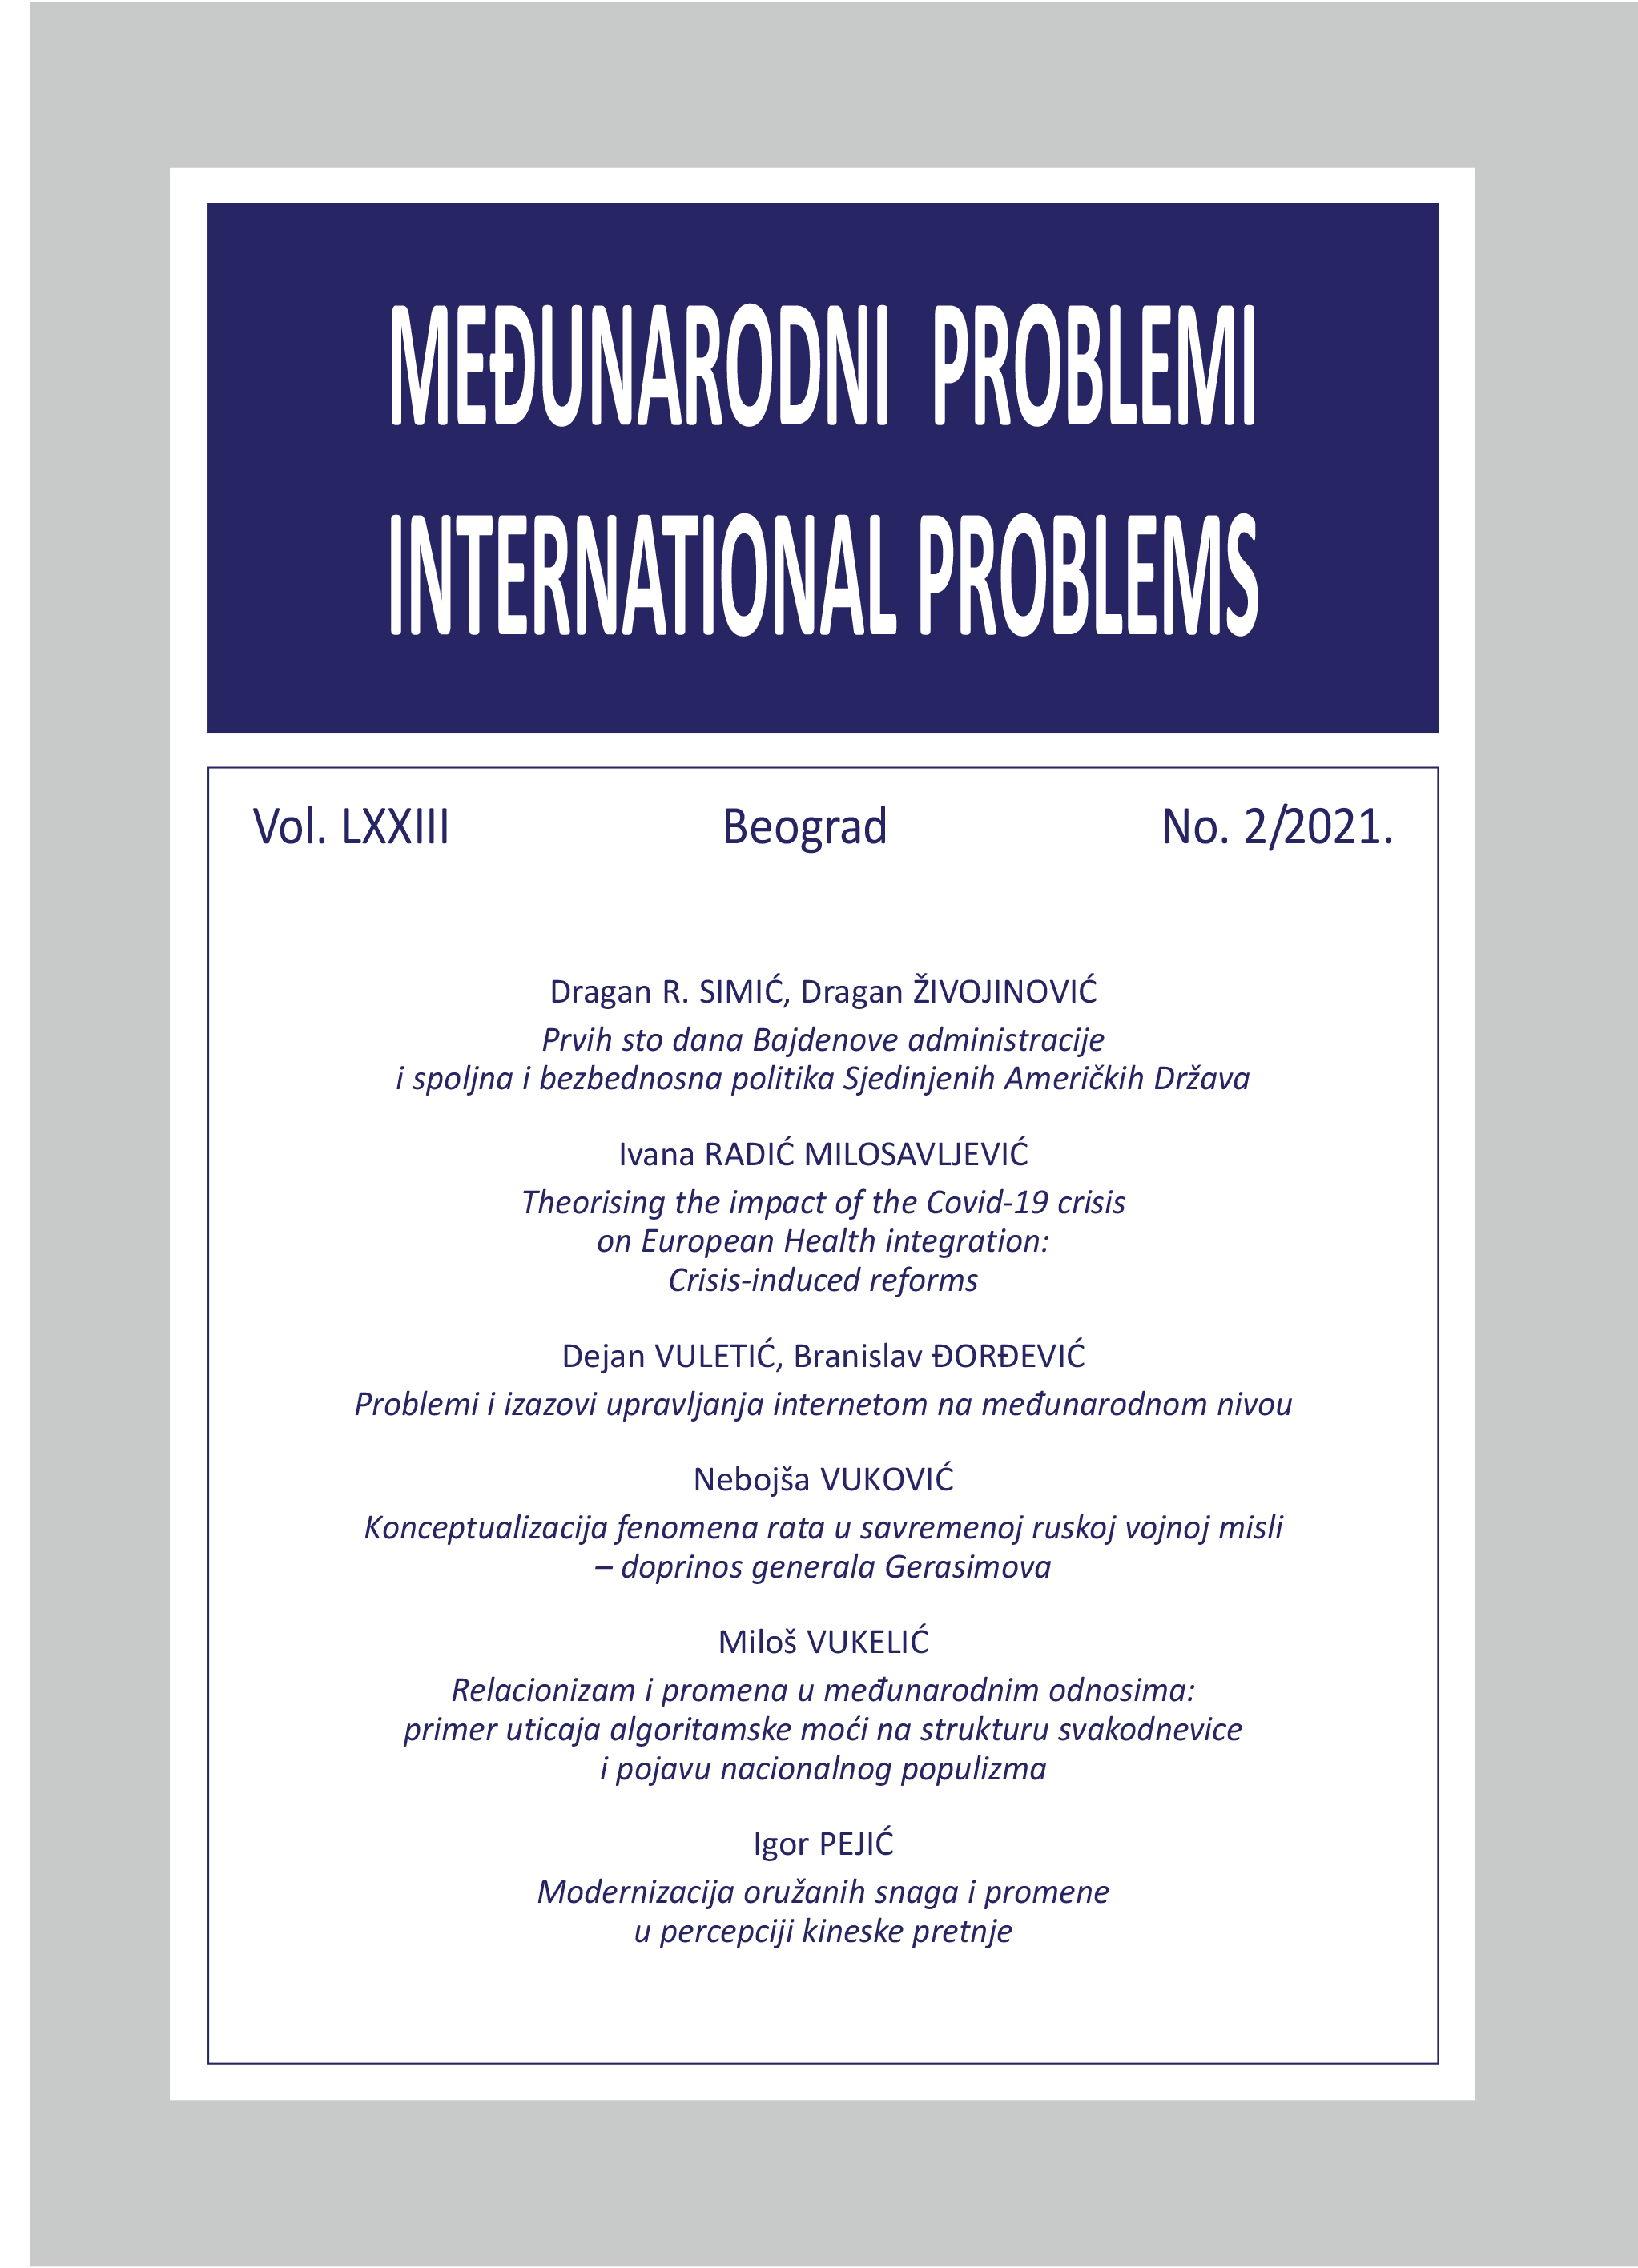 PROBLEMS AND CHALLENGES OF INTERNET GOVERNANCE AT THE INTERNATIONAL LEVEL Cover Image